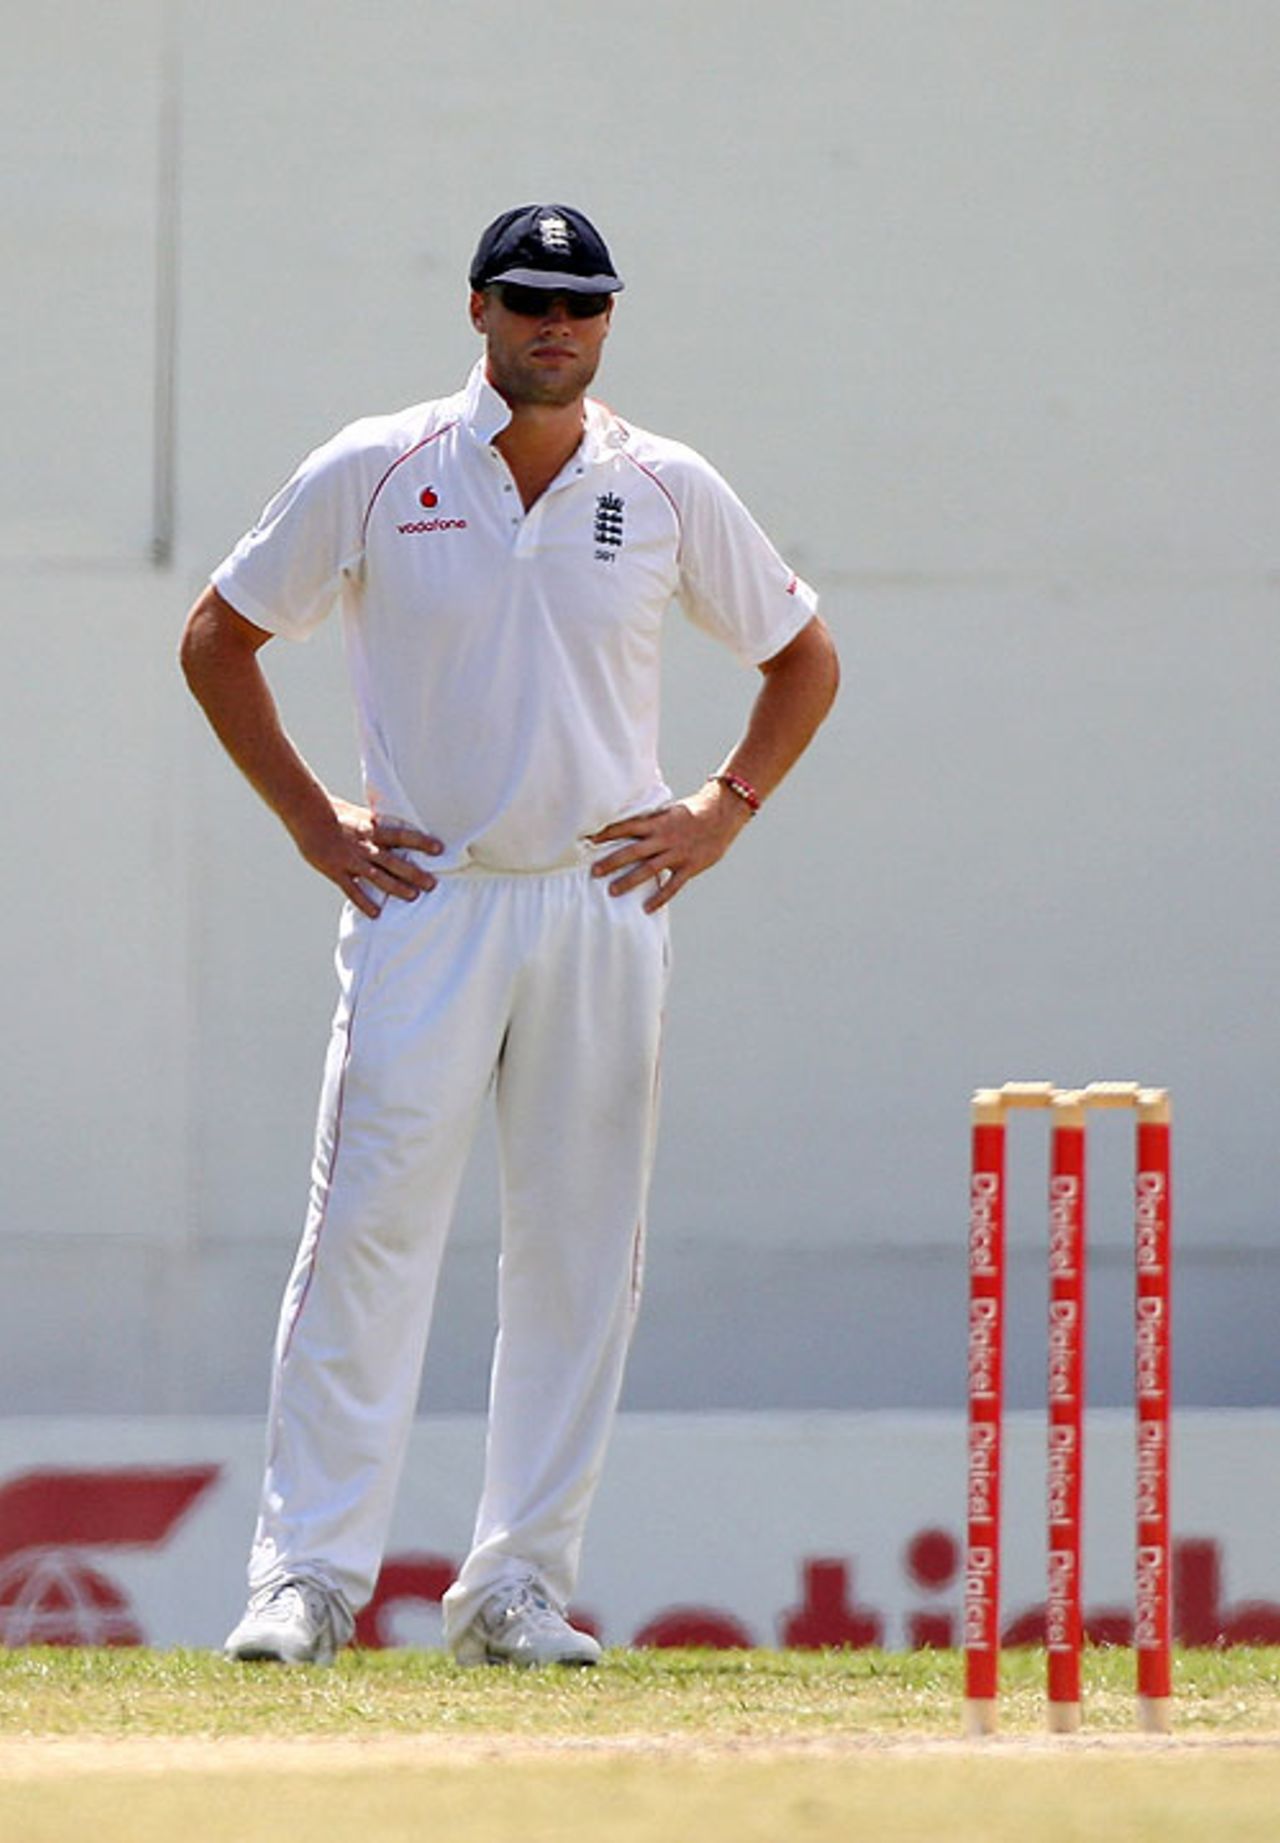 Andrew Flintoff cut a disconsolate figure as England toiled for wickets on the final day at the ARG, West Indies v England, 3rd Test, Antigua, 5th day, February 19, 2009